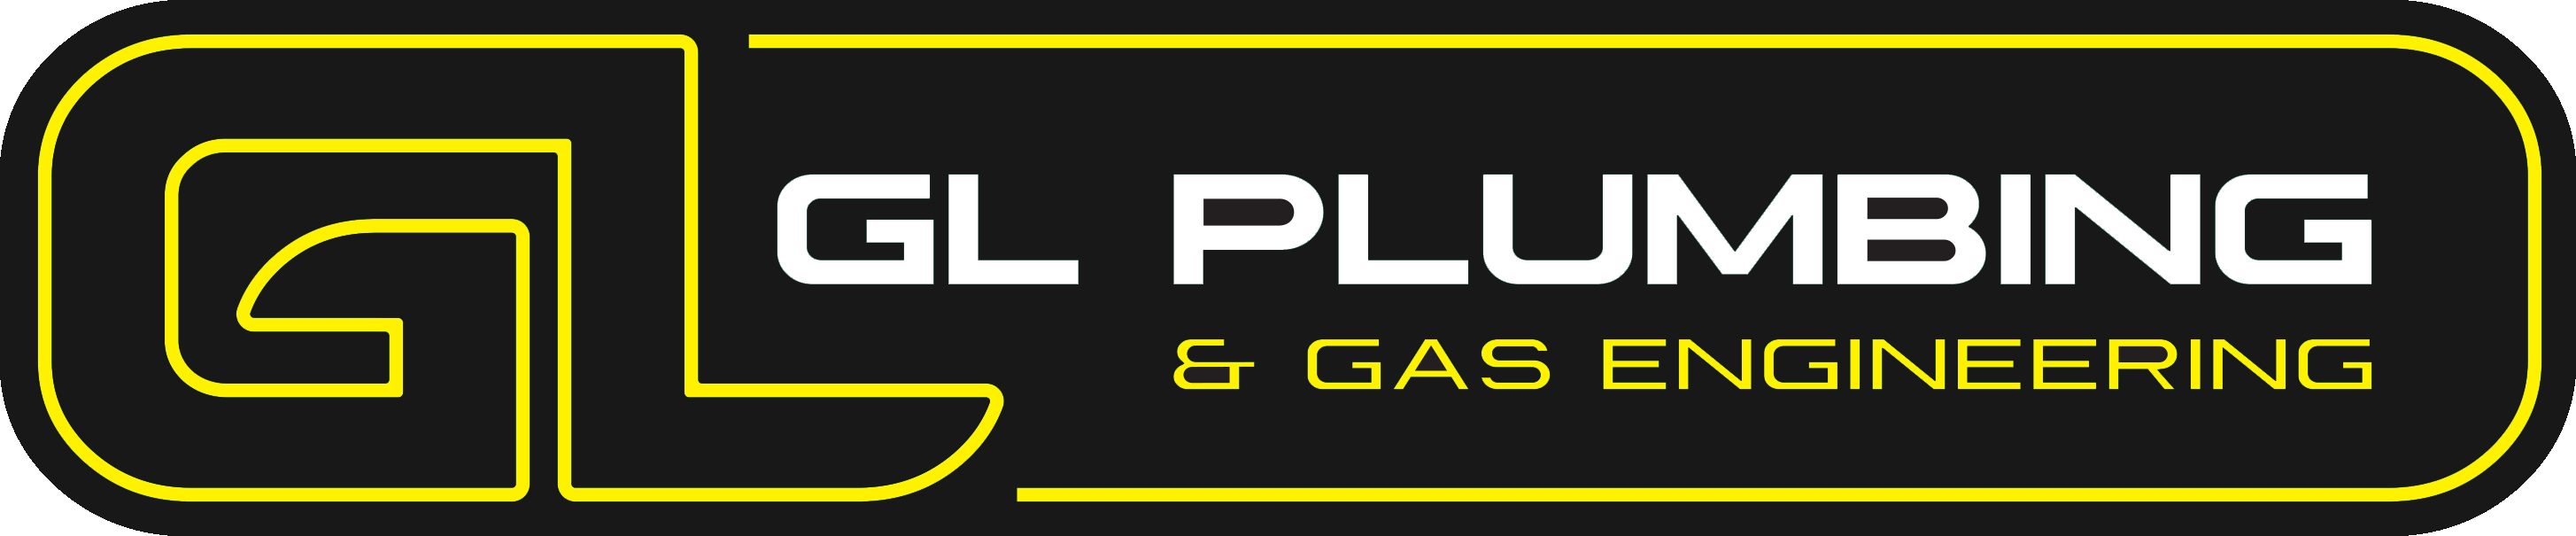 G.L. Plumbing and Gas Engineering